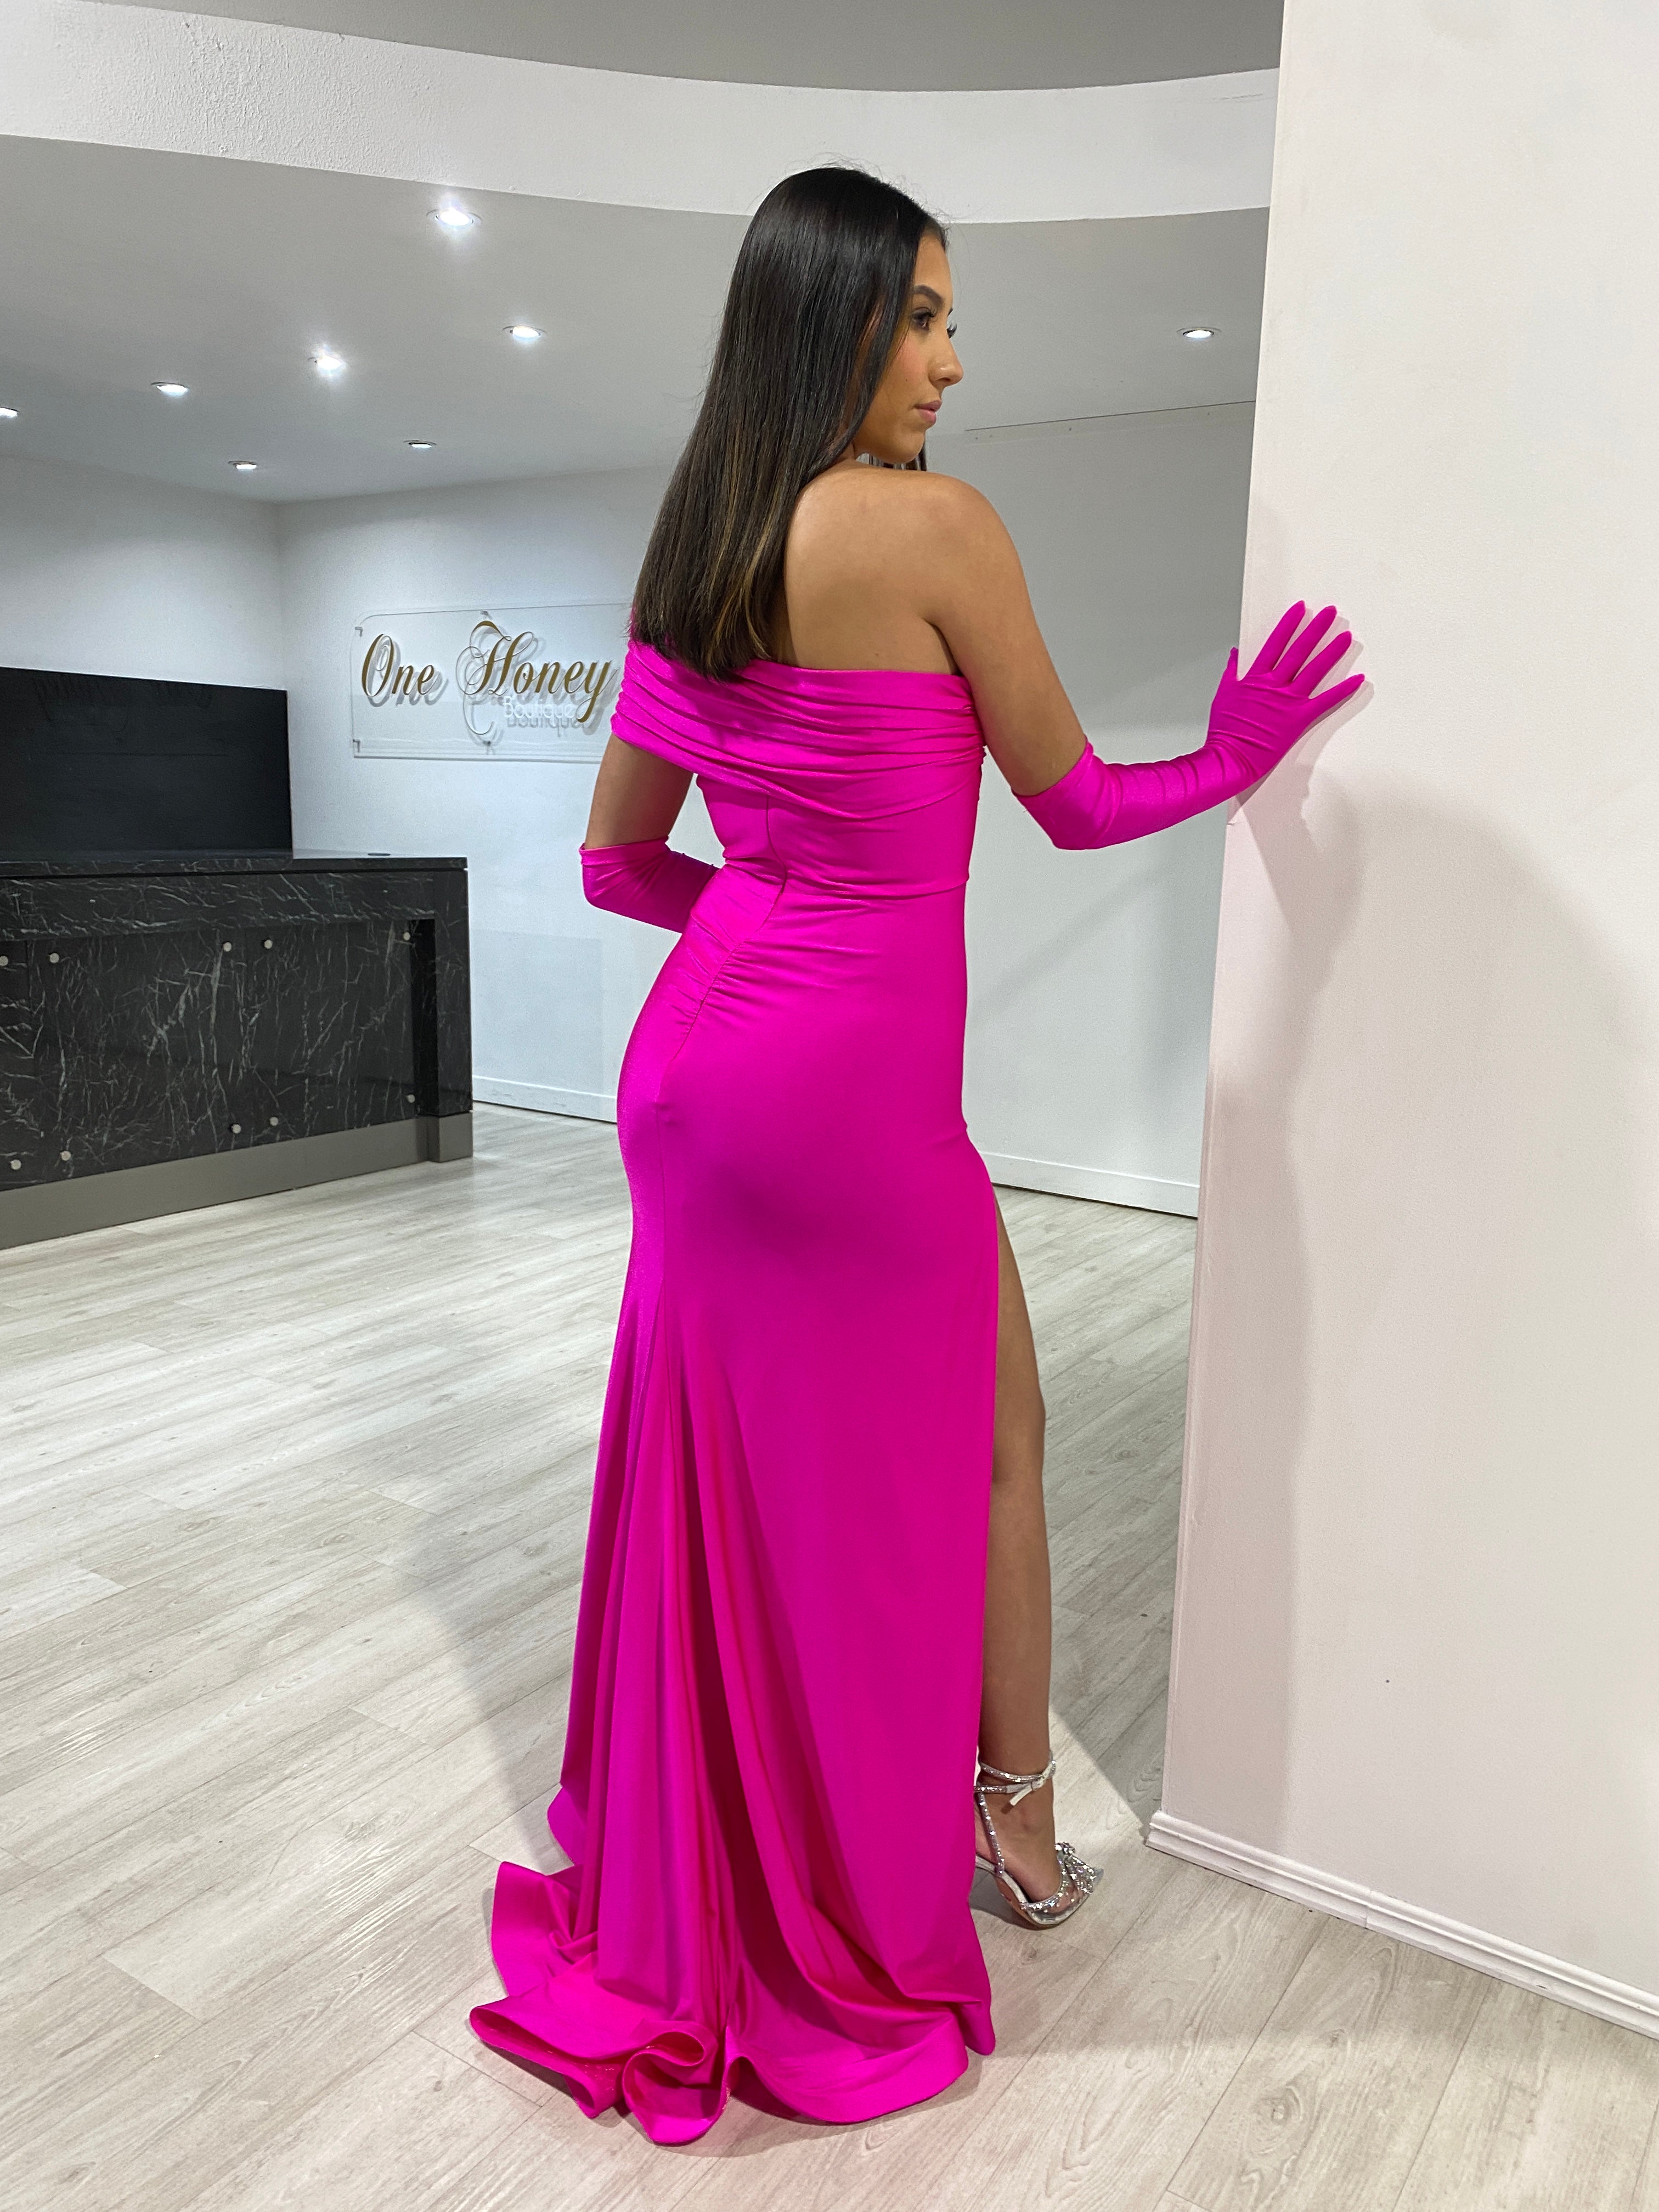 Honey Couture BALENCI-USSY Hot Pink Mermaid Formal Dress w Gloves